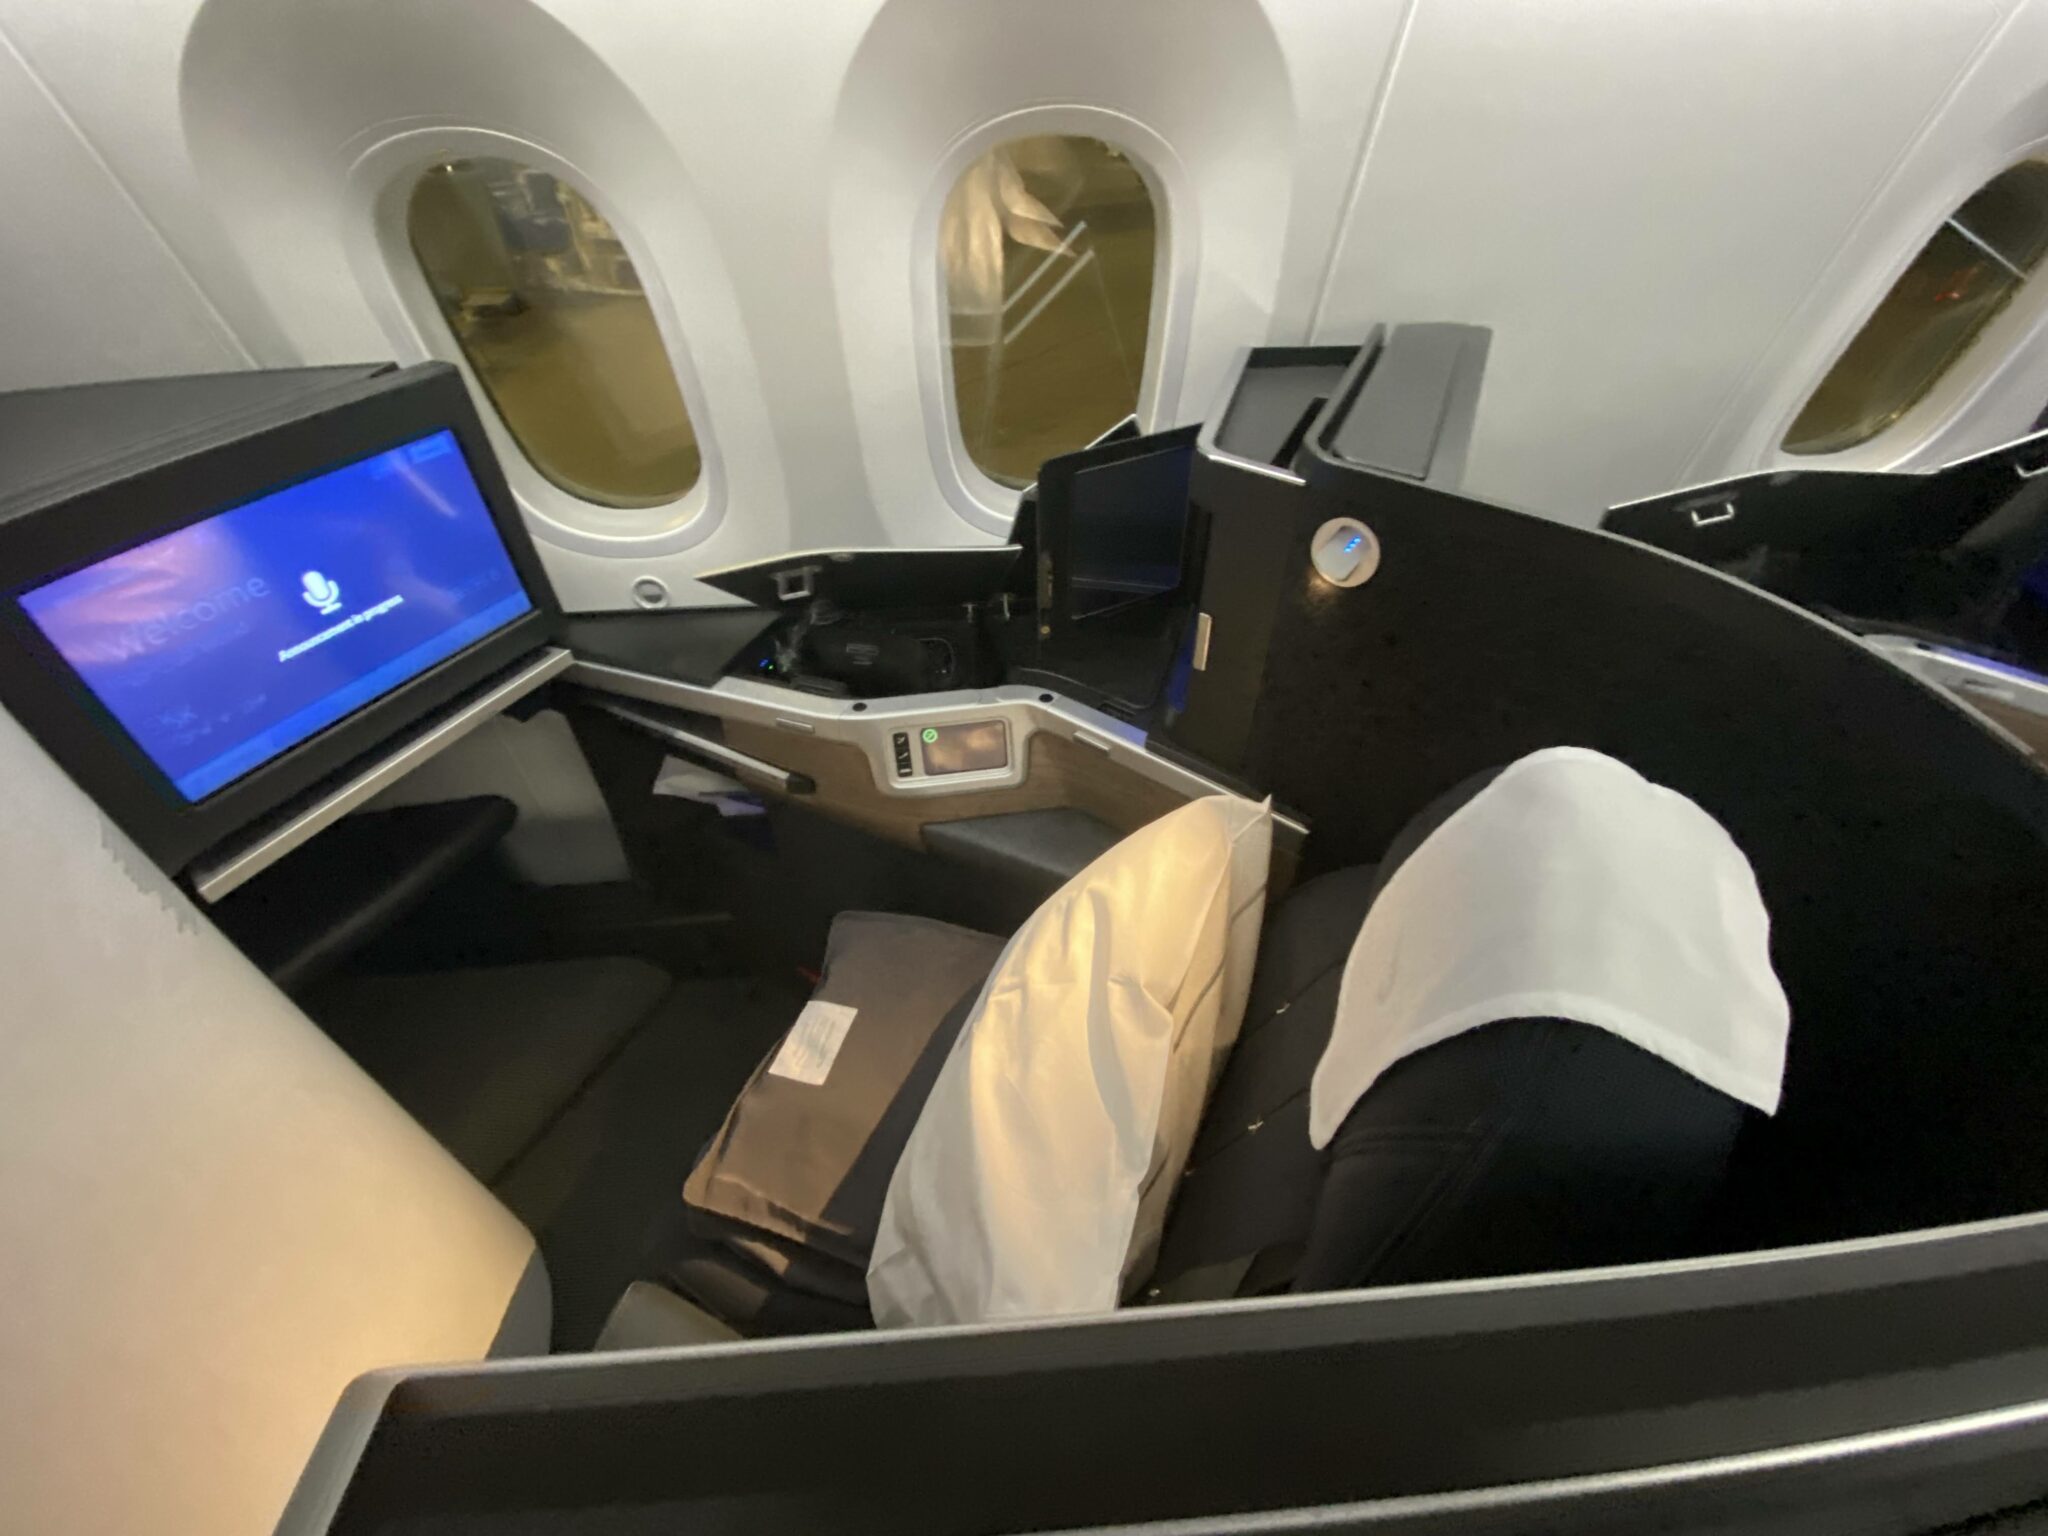 airline loyalty program reduces redemption cost and 10% off - B787 10 seat